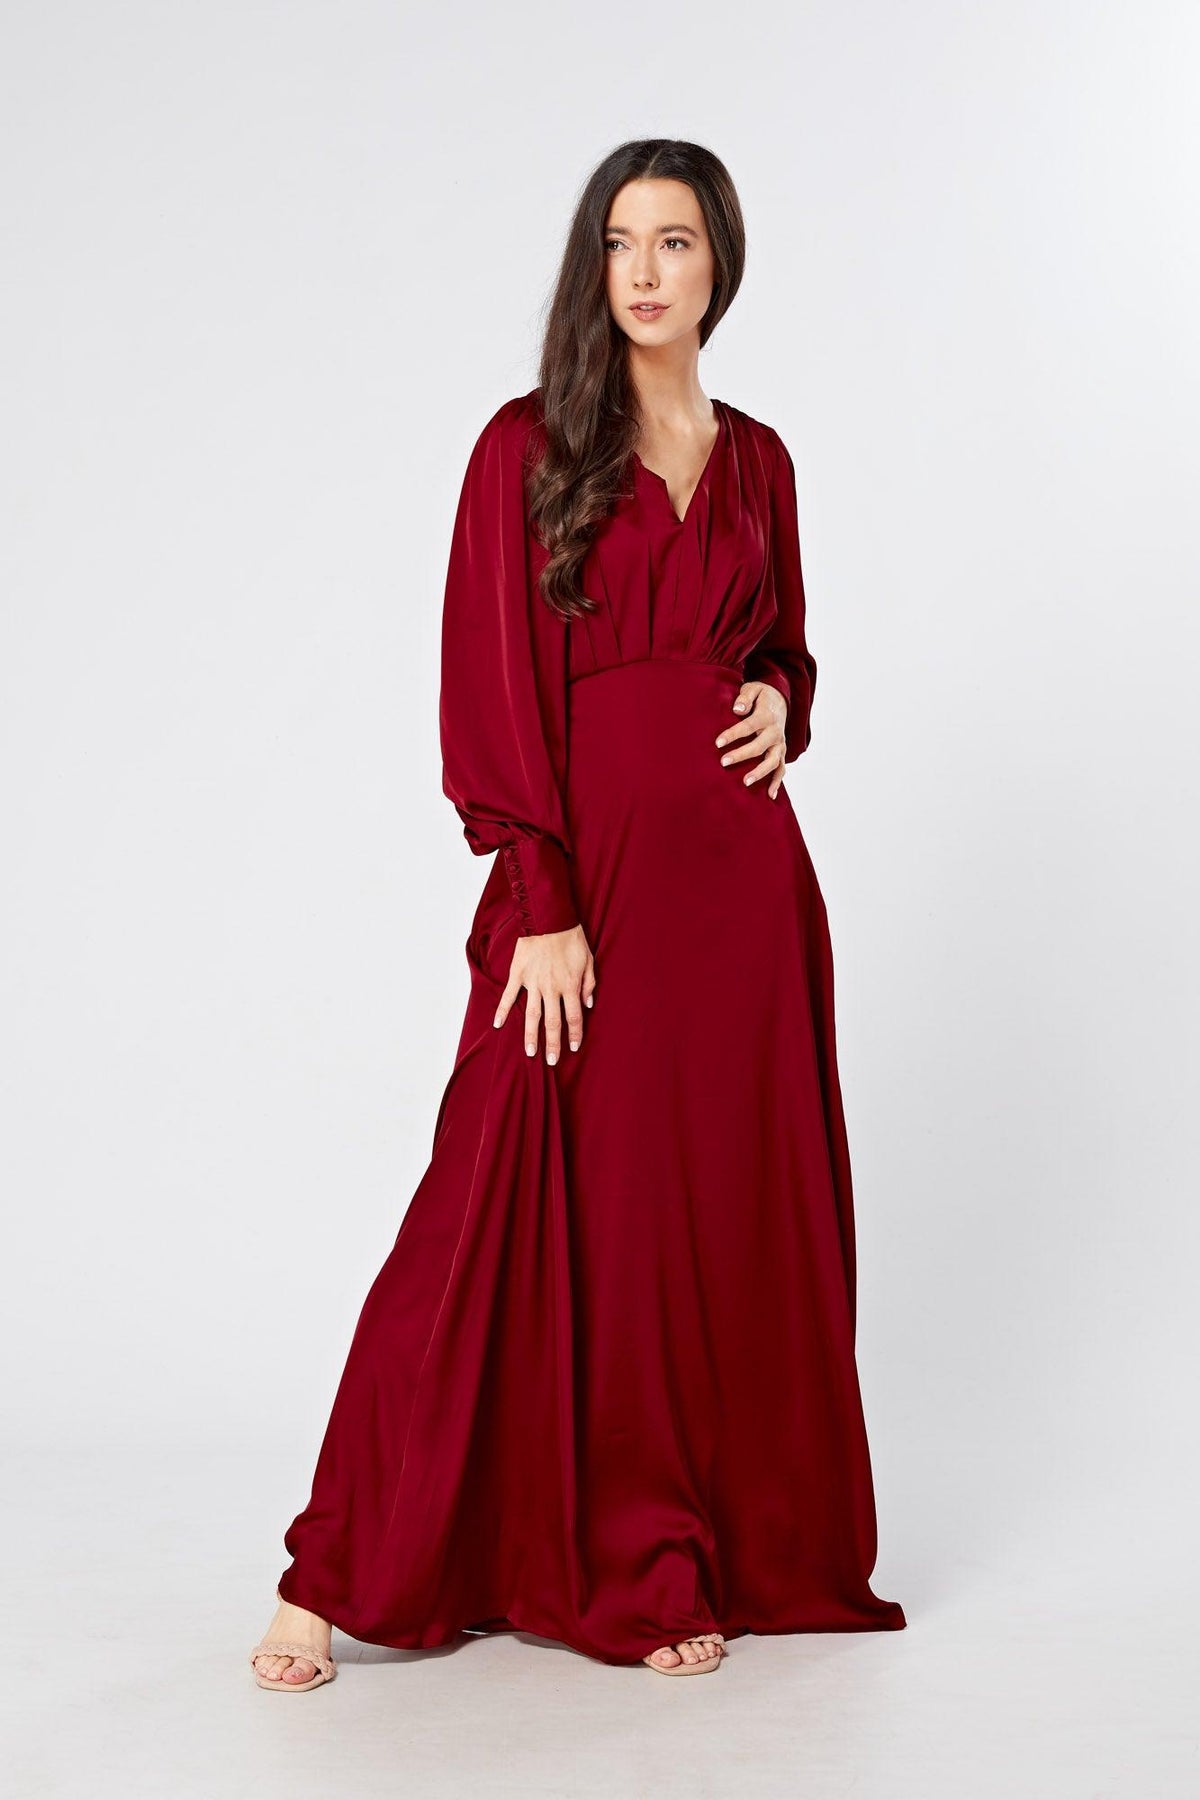 19+ Red Maxi Dress With Sleeves